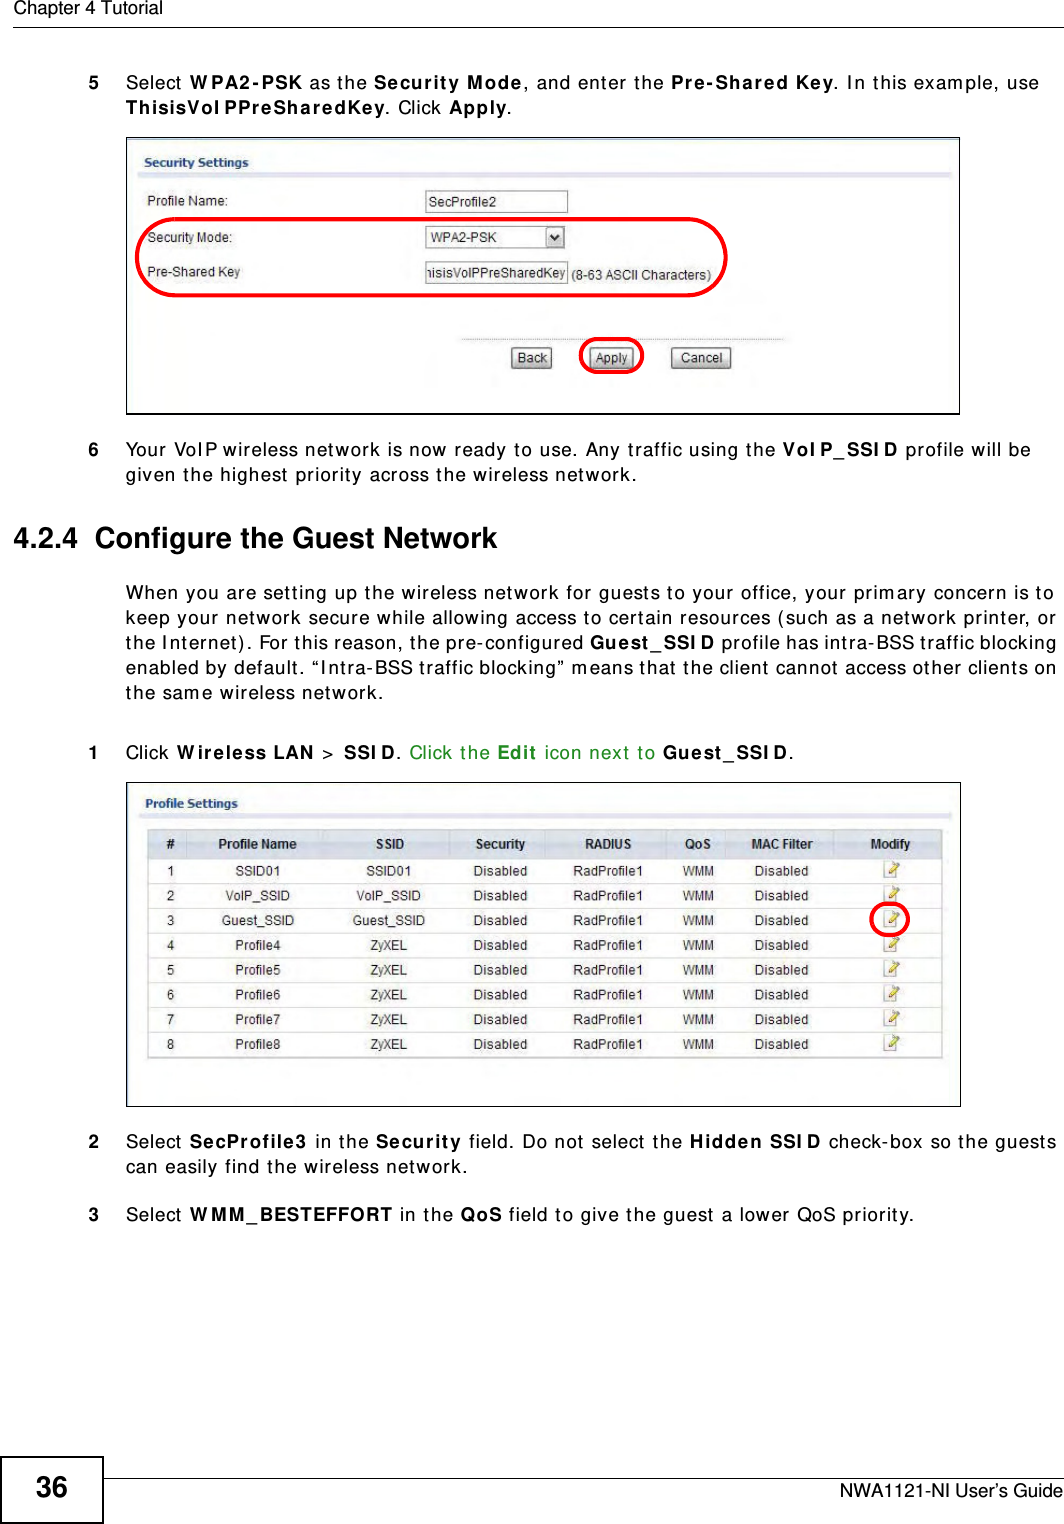 Chapter 4 TutorialNWA1121-NI User’s Guide365Select WPA2-PSK as the Security Mode, and enter the Pre-Shared Key. In this example, use ThisisVoIPPreSharedKey. Click Apply. 6Your VoIP wireless network is now ready to use. Any traffic using the VoIP_SSID profile will be given the highest priority across the wireless network.4.2.4  Configure the Guest NetworkWhen you are setting up the wireless network for guests to your office, your primary concern is to keep your network secure while allowing access to certain resources (such as a network printer, or the Internet). For this reason, the pre-configured Guest_SSID profile has intra-BSS traffic blocking enabled by default. “Intra-BSS traffic blocking” means that the client cannot access other clients on the same wireless network.1Click Wireless LAN &gt; SSID. Click the Edit icon next to Guest_SSID. 2Select SecProfile3 in the Security field. Do not select the Hidden SSID check-box so the guests can easily find the wireless network. 3Select WMM_BESTEFFORT in the QoS field to give the guest a lower QoS priority. 